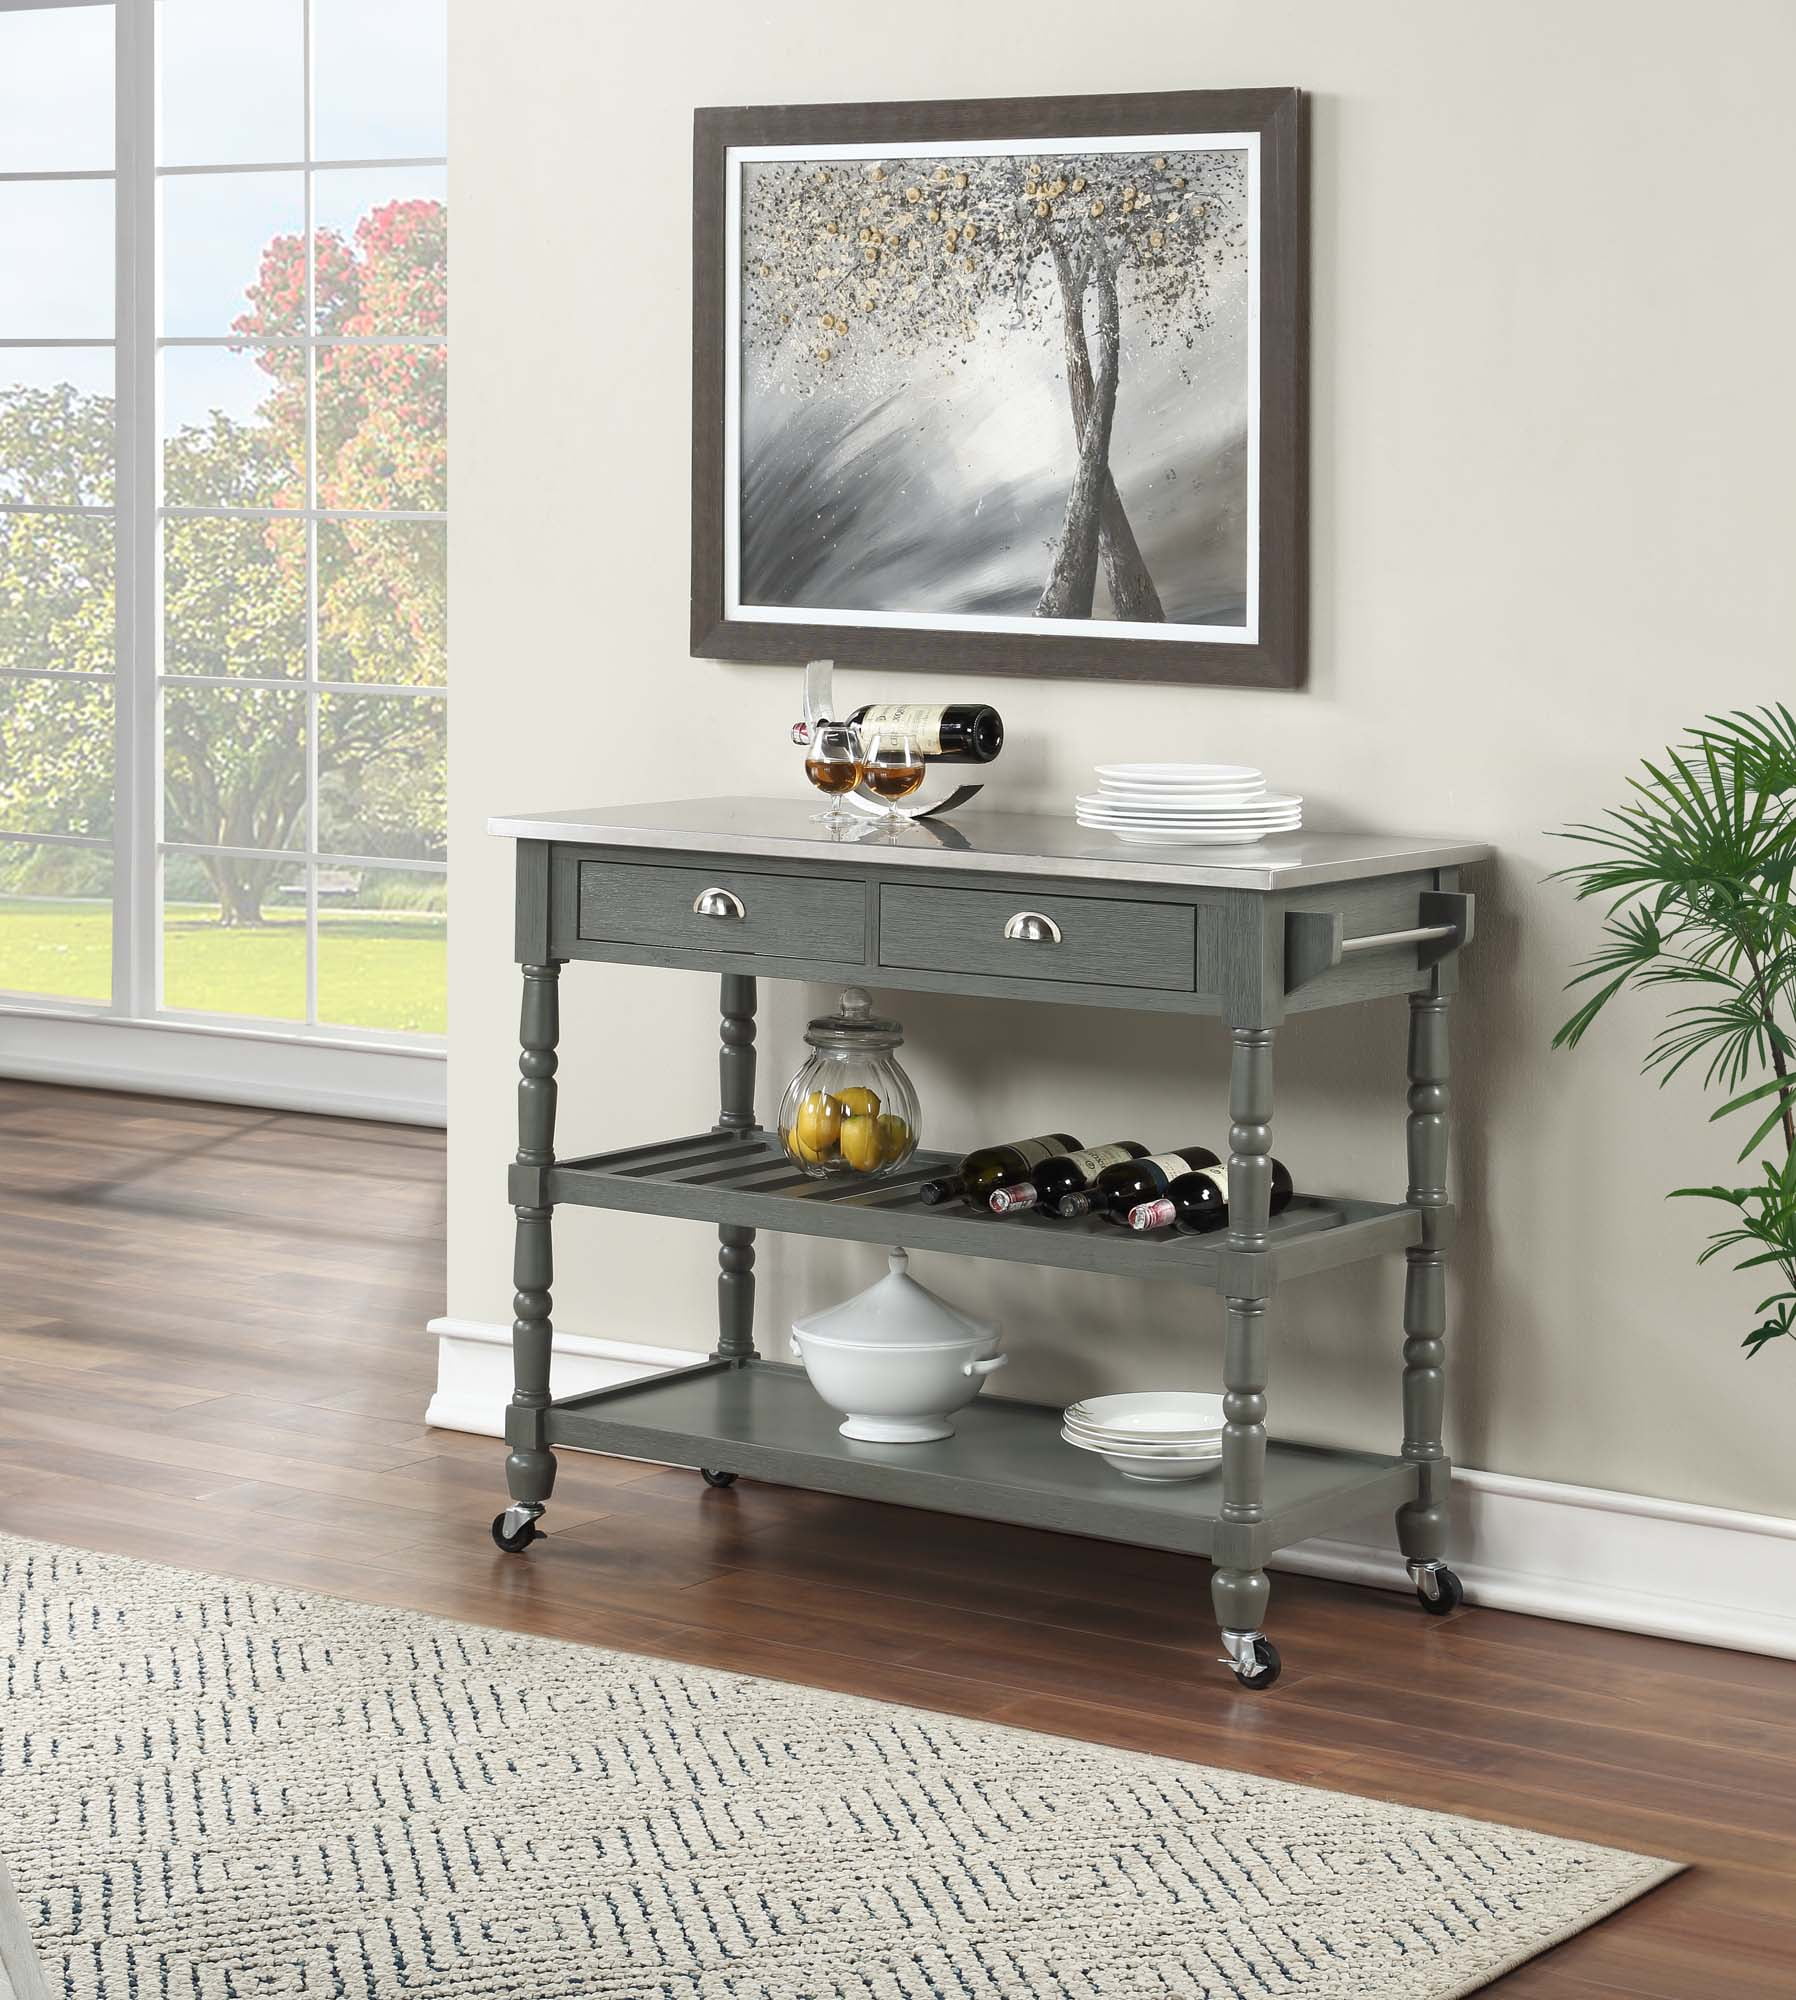 Picture of Convenience Concepts 802235WBDGY French Country 3 Tier Stainless Steel Kitchen Cart with Drawers - Stainless Steel/Wirebrush Dark